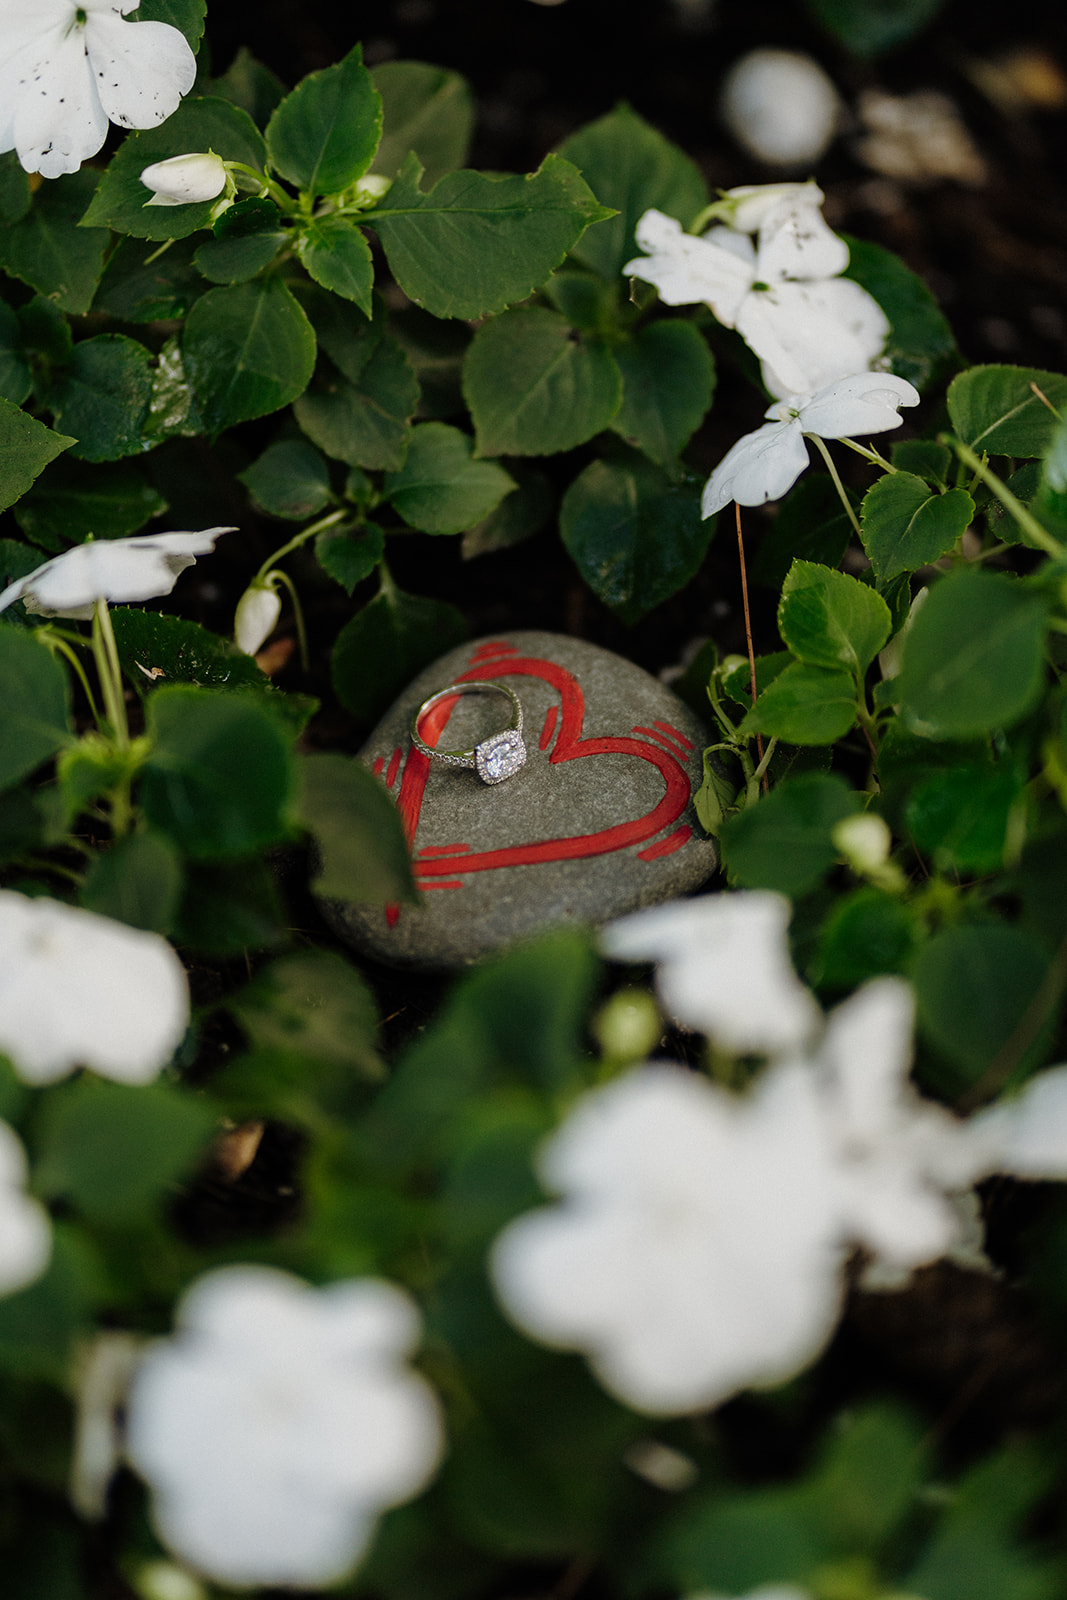 a ring on a rock with a red heart painted.